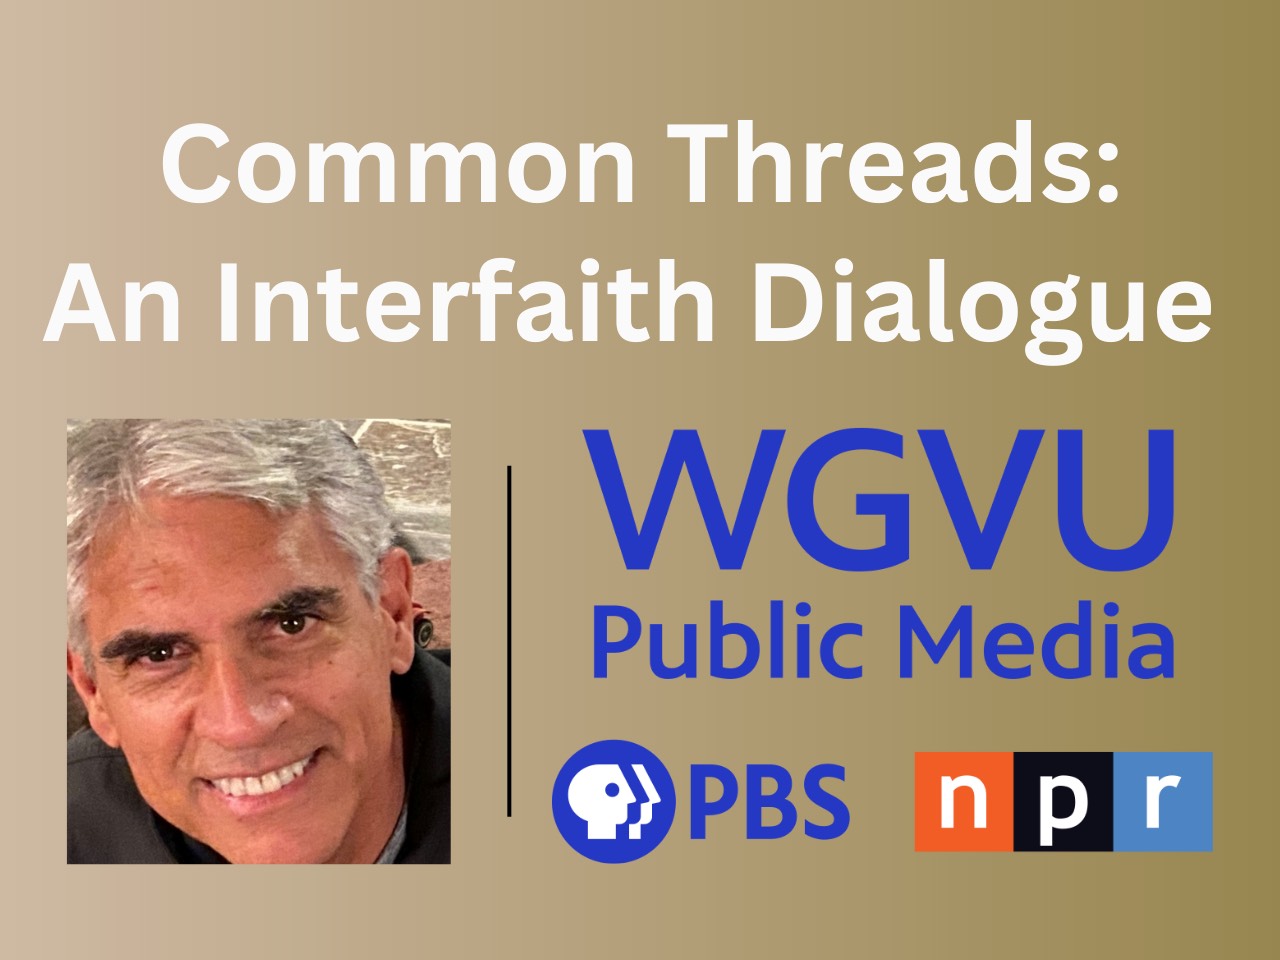 "Common Threads: An Interfaith Dialogue" in white with Fred Stella's photo and the WGVU Public Media logo